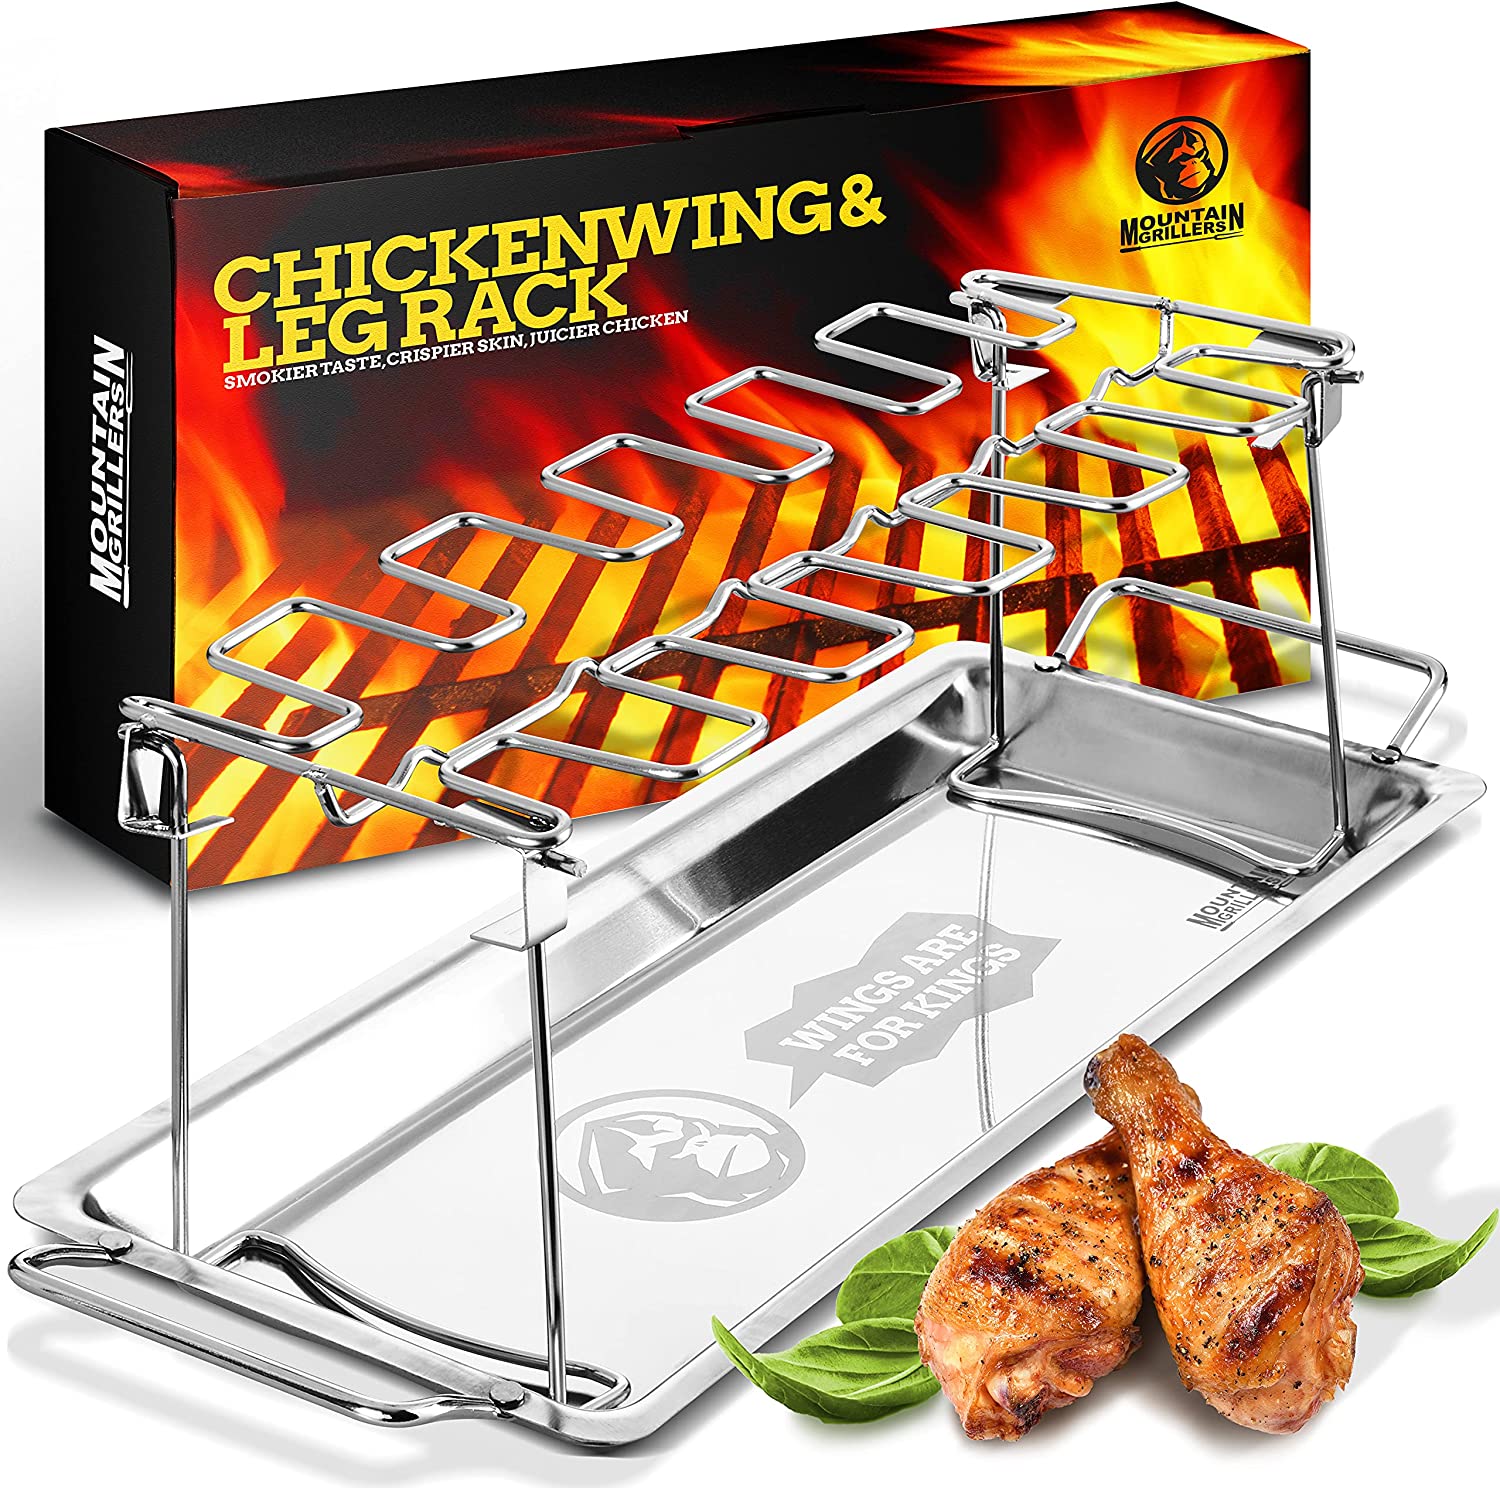 Details about   Stainless Steel Chicken Wing Leg Rack with Drip Tray Grill Durable AU Fo C2R8 